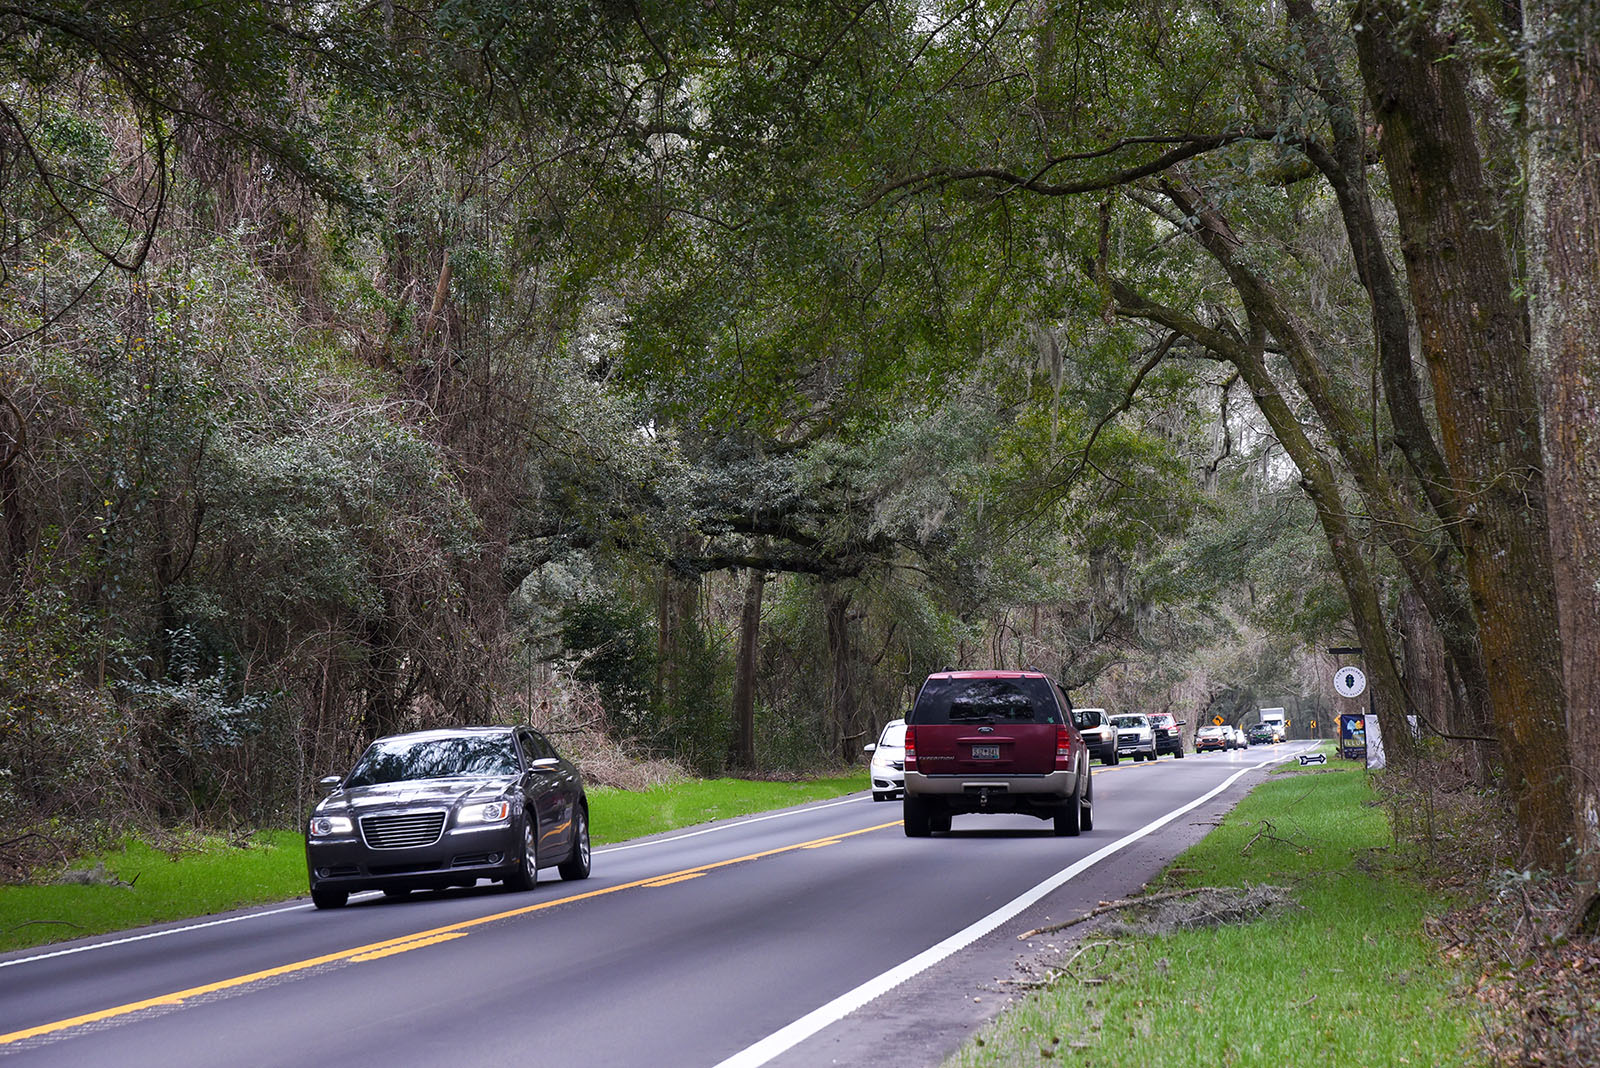 Cars traveling on a two-lane, rural road under a canopy of trees.